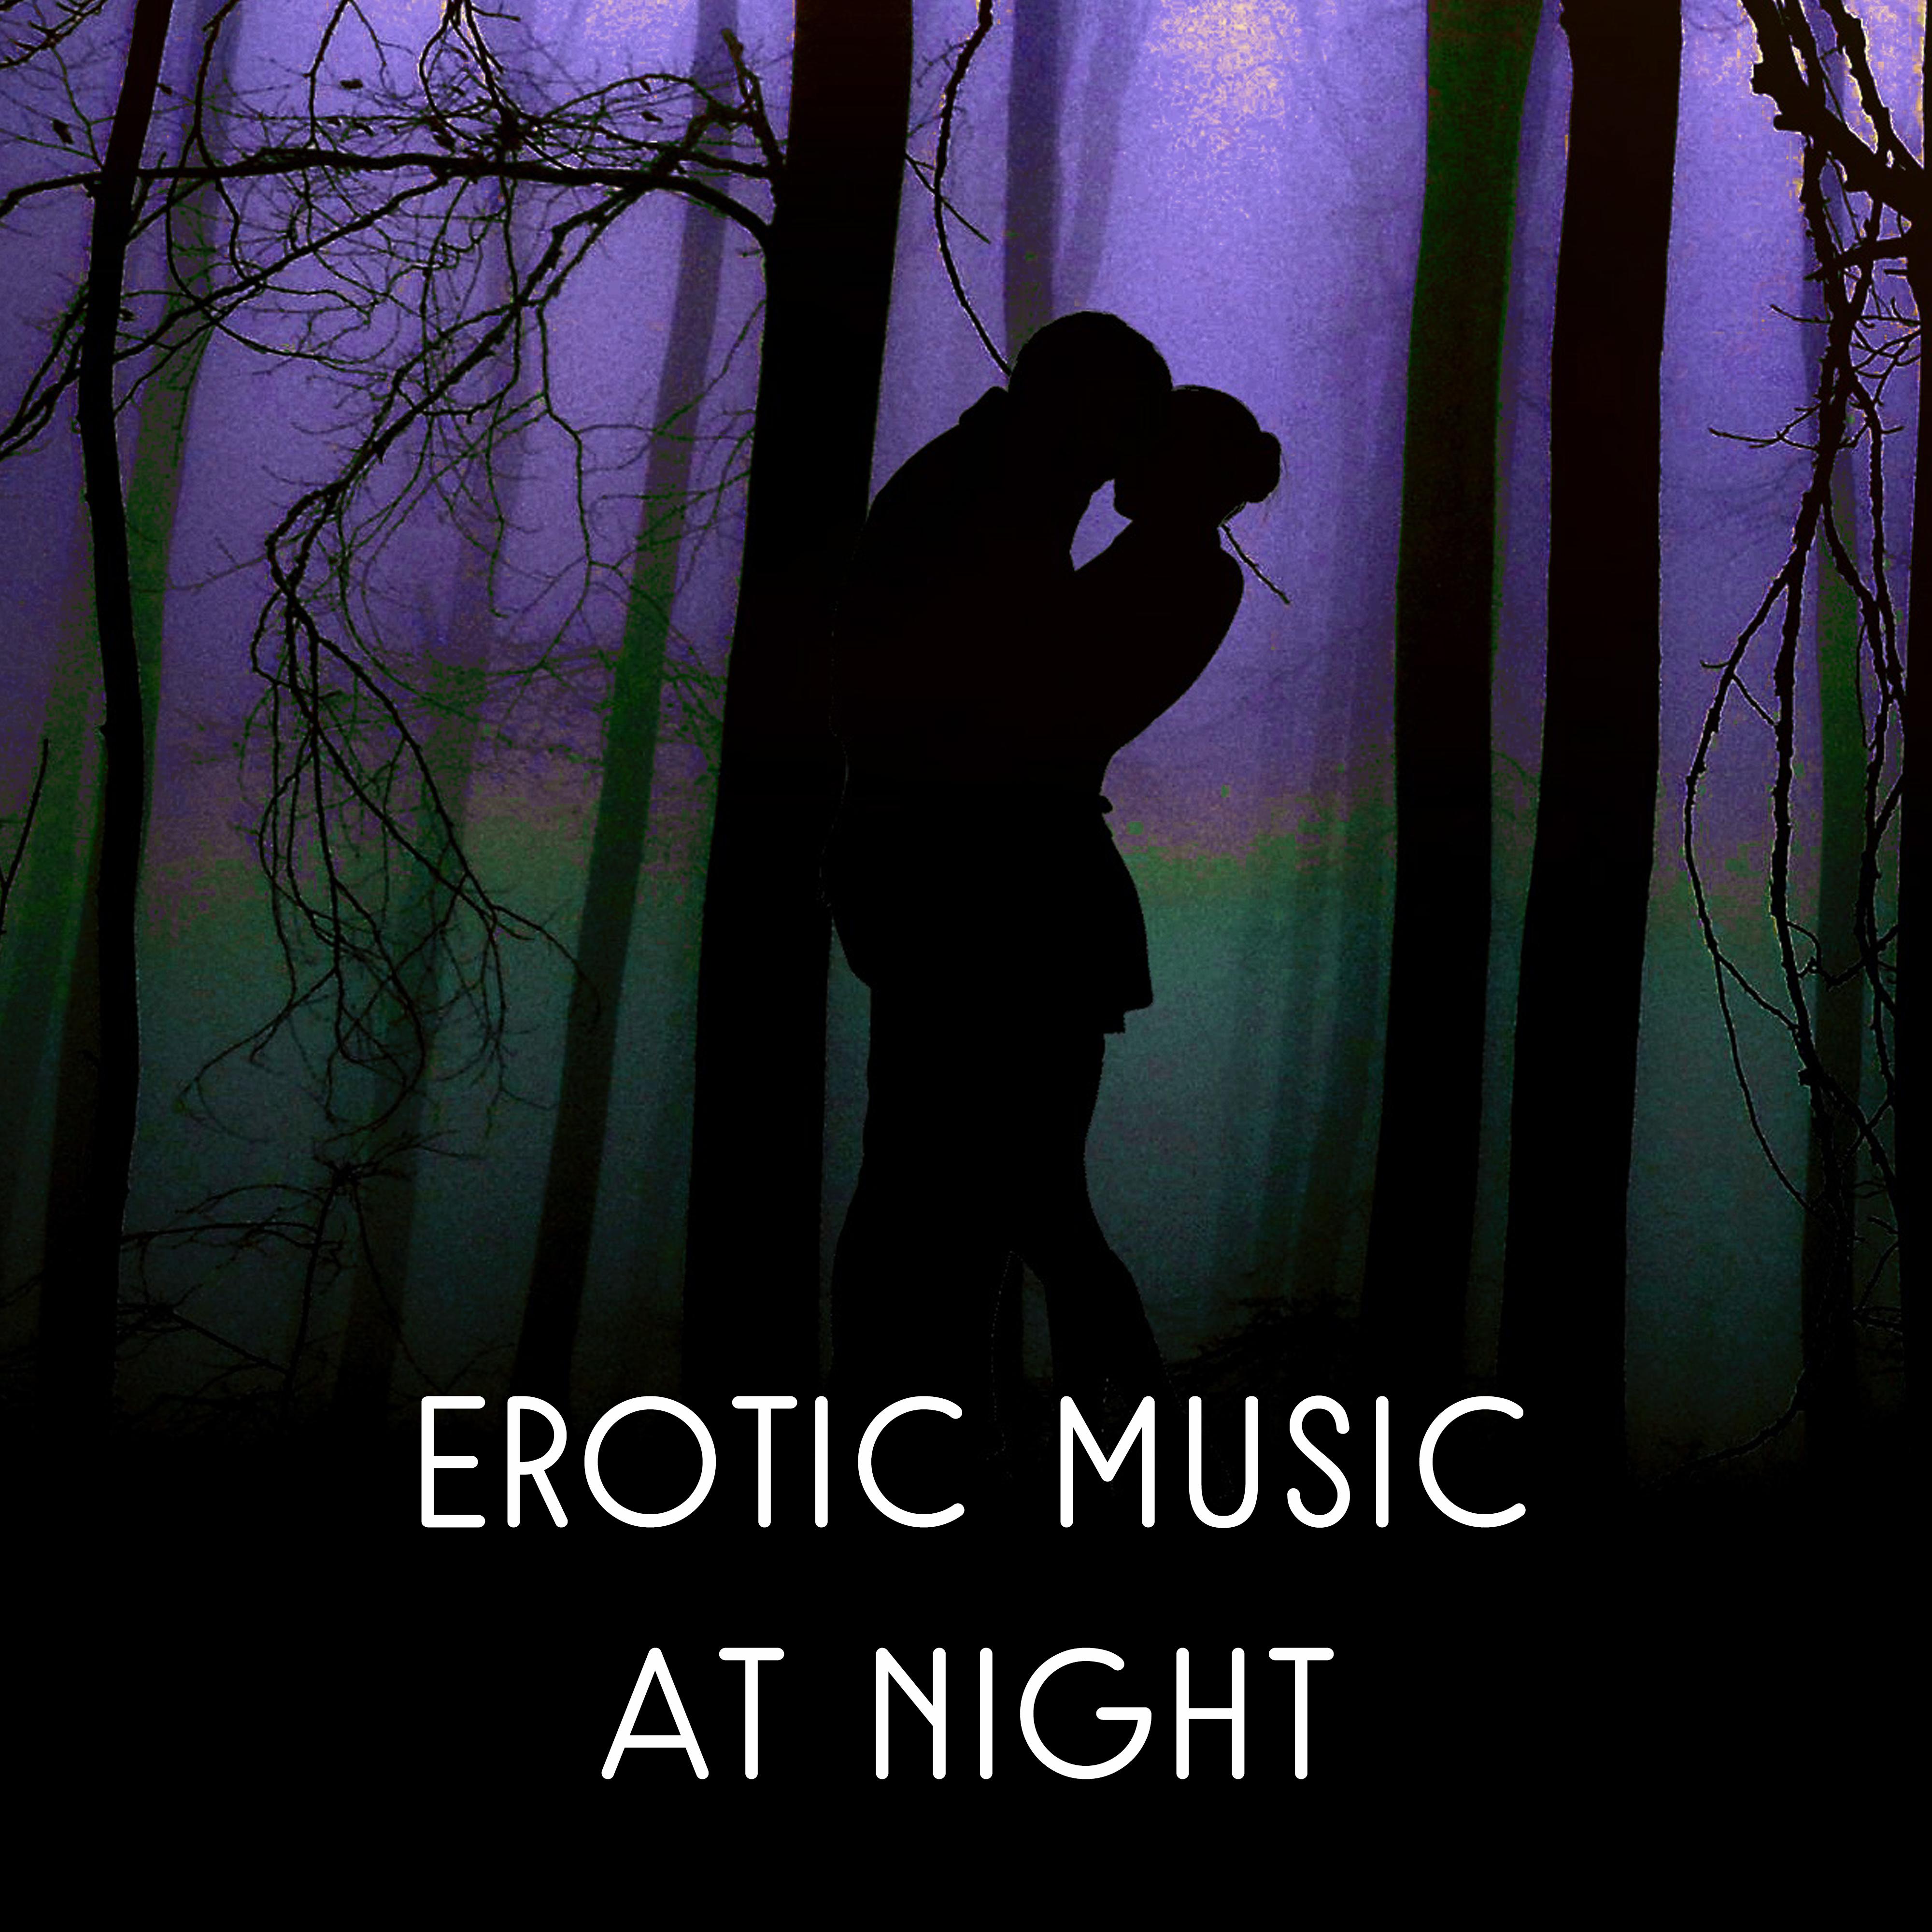 Erotic Music at Night – Sensual Jazz Music, Romantic Evening, Sexy Jazz, Relaxation Sounds for Rest, Soothing Piano, Deep Massage